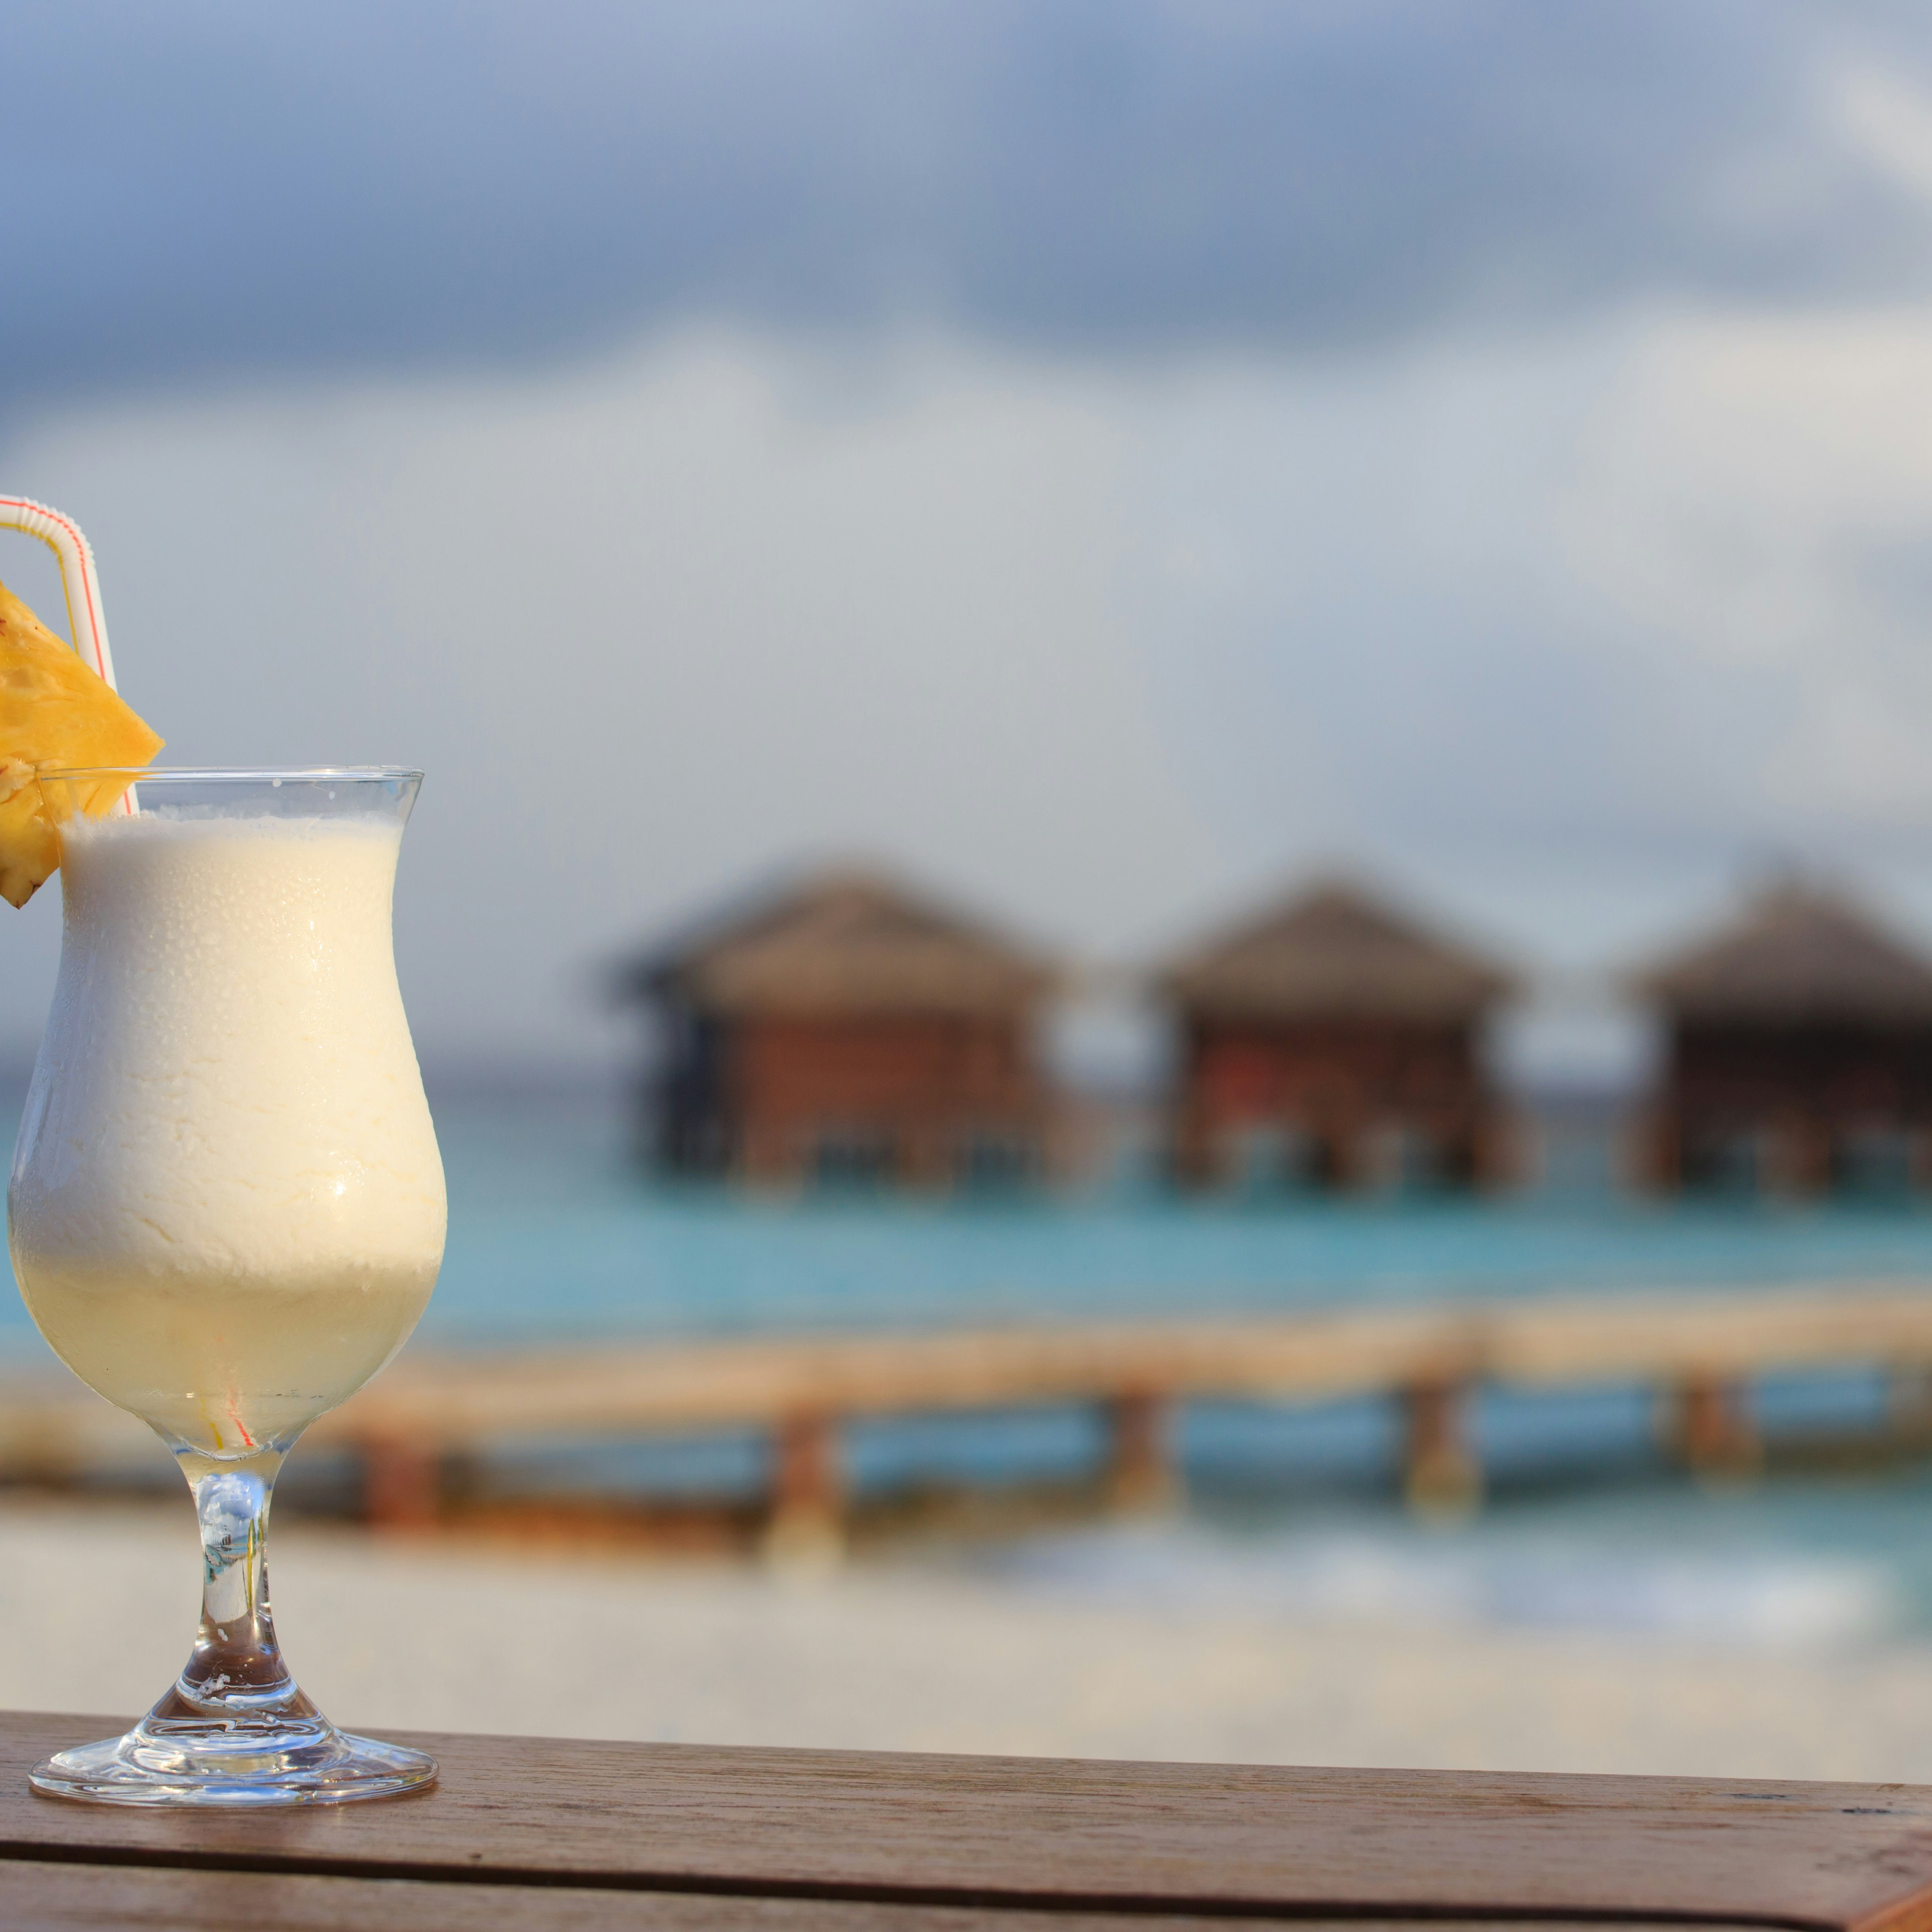 A poco grande glass of Pina Colada garnished with a pineapple wedge and a red and white stripped drinking straw sits on a wooden ledge. In the background you can see four bungalows in the ocean.